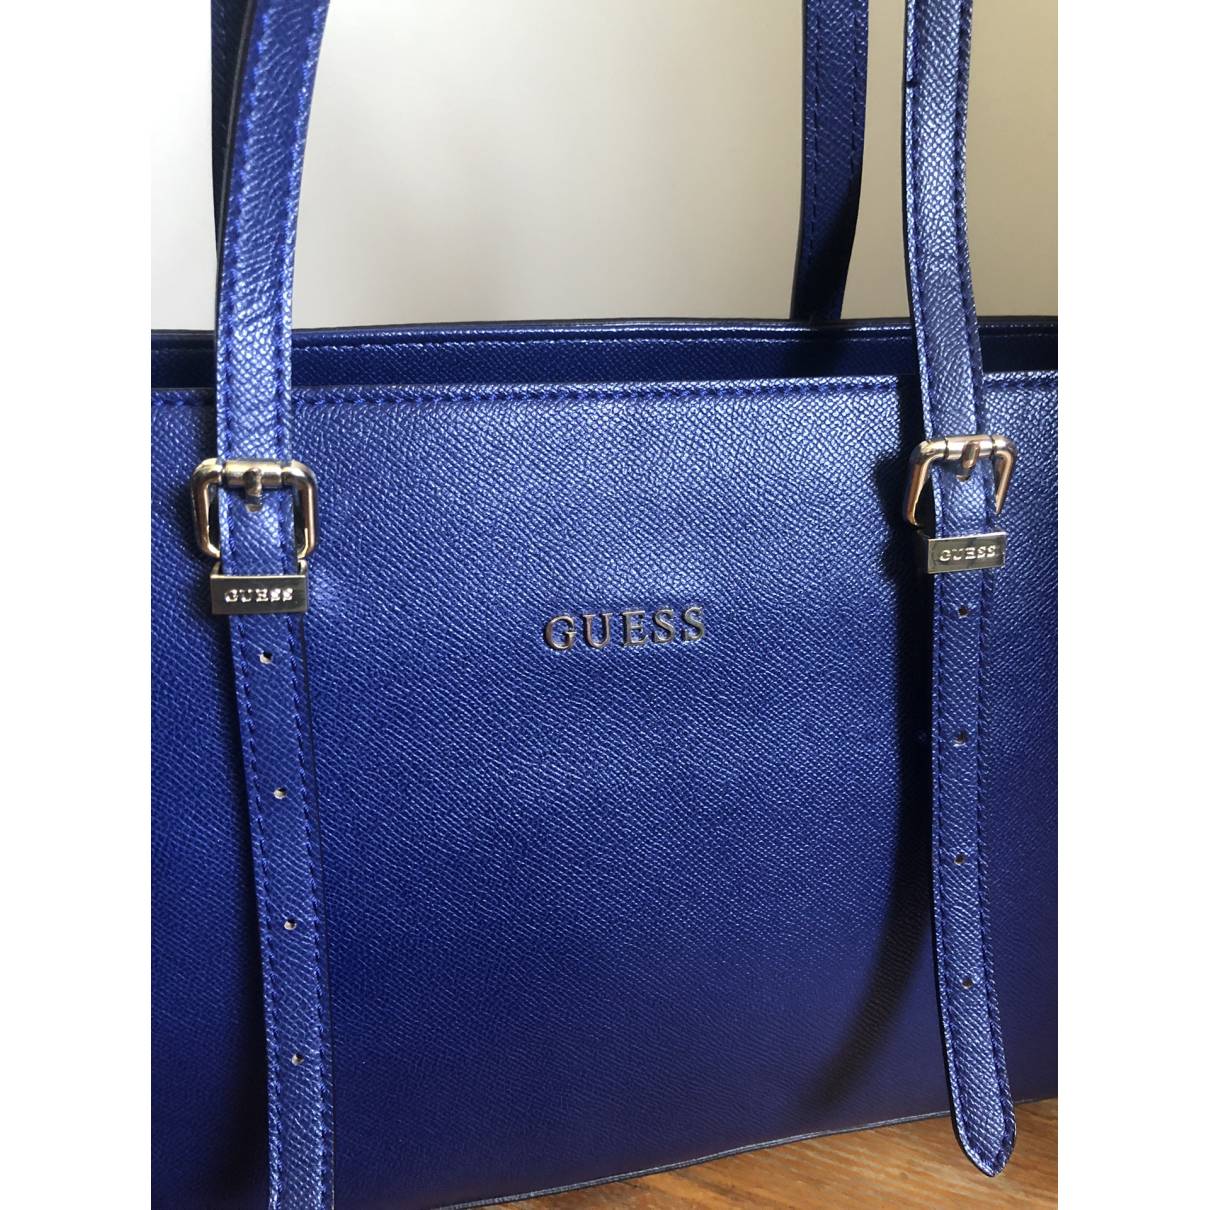 Guess - Authenticated Handbag - Blue Plain for Women, Very Good Condition